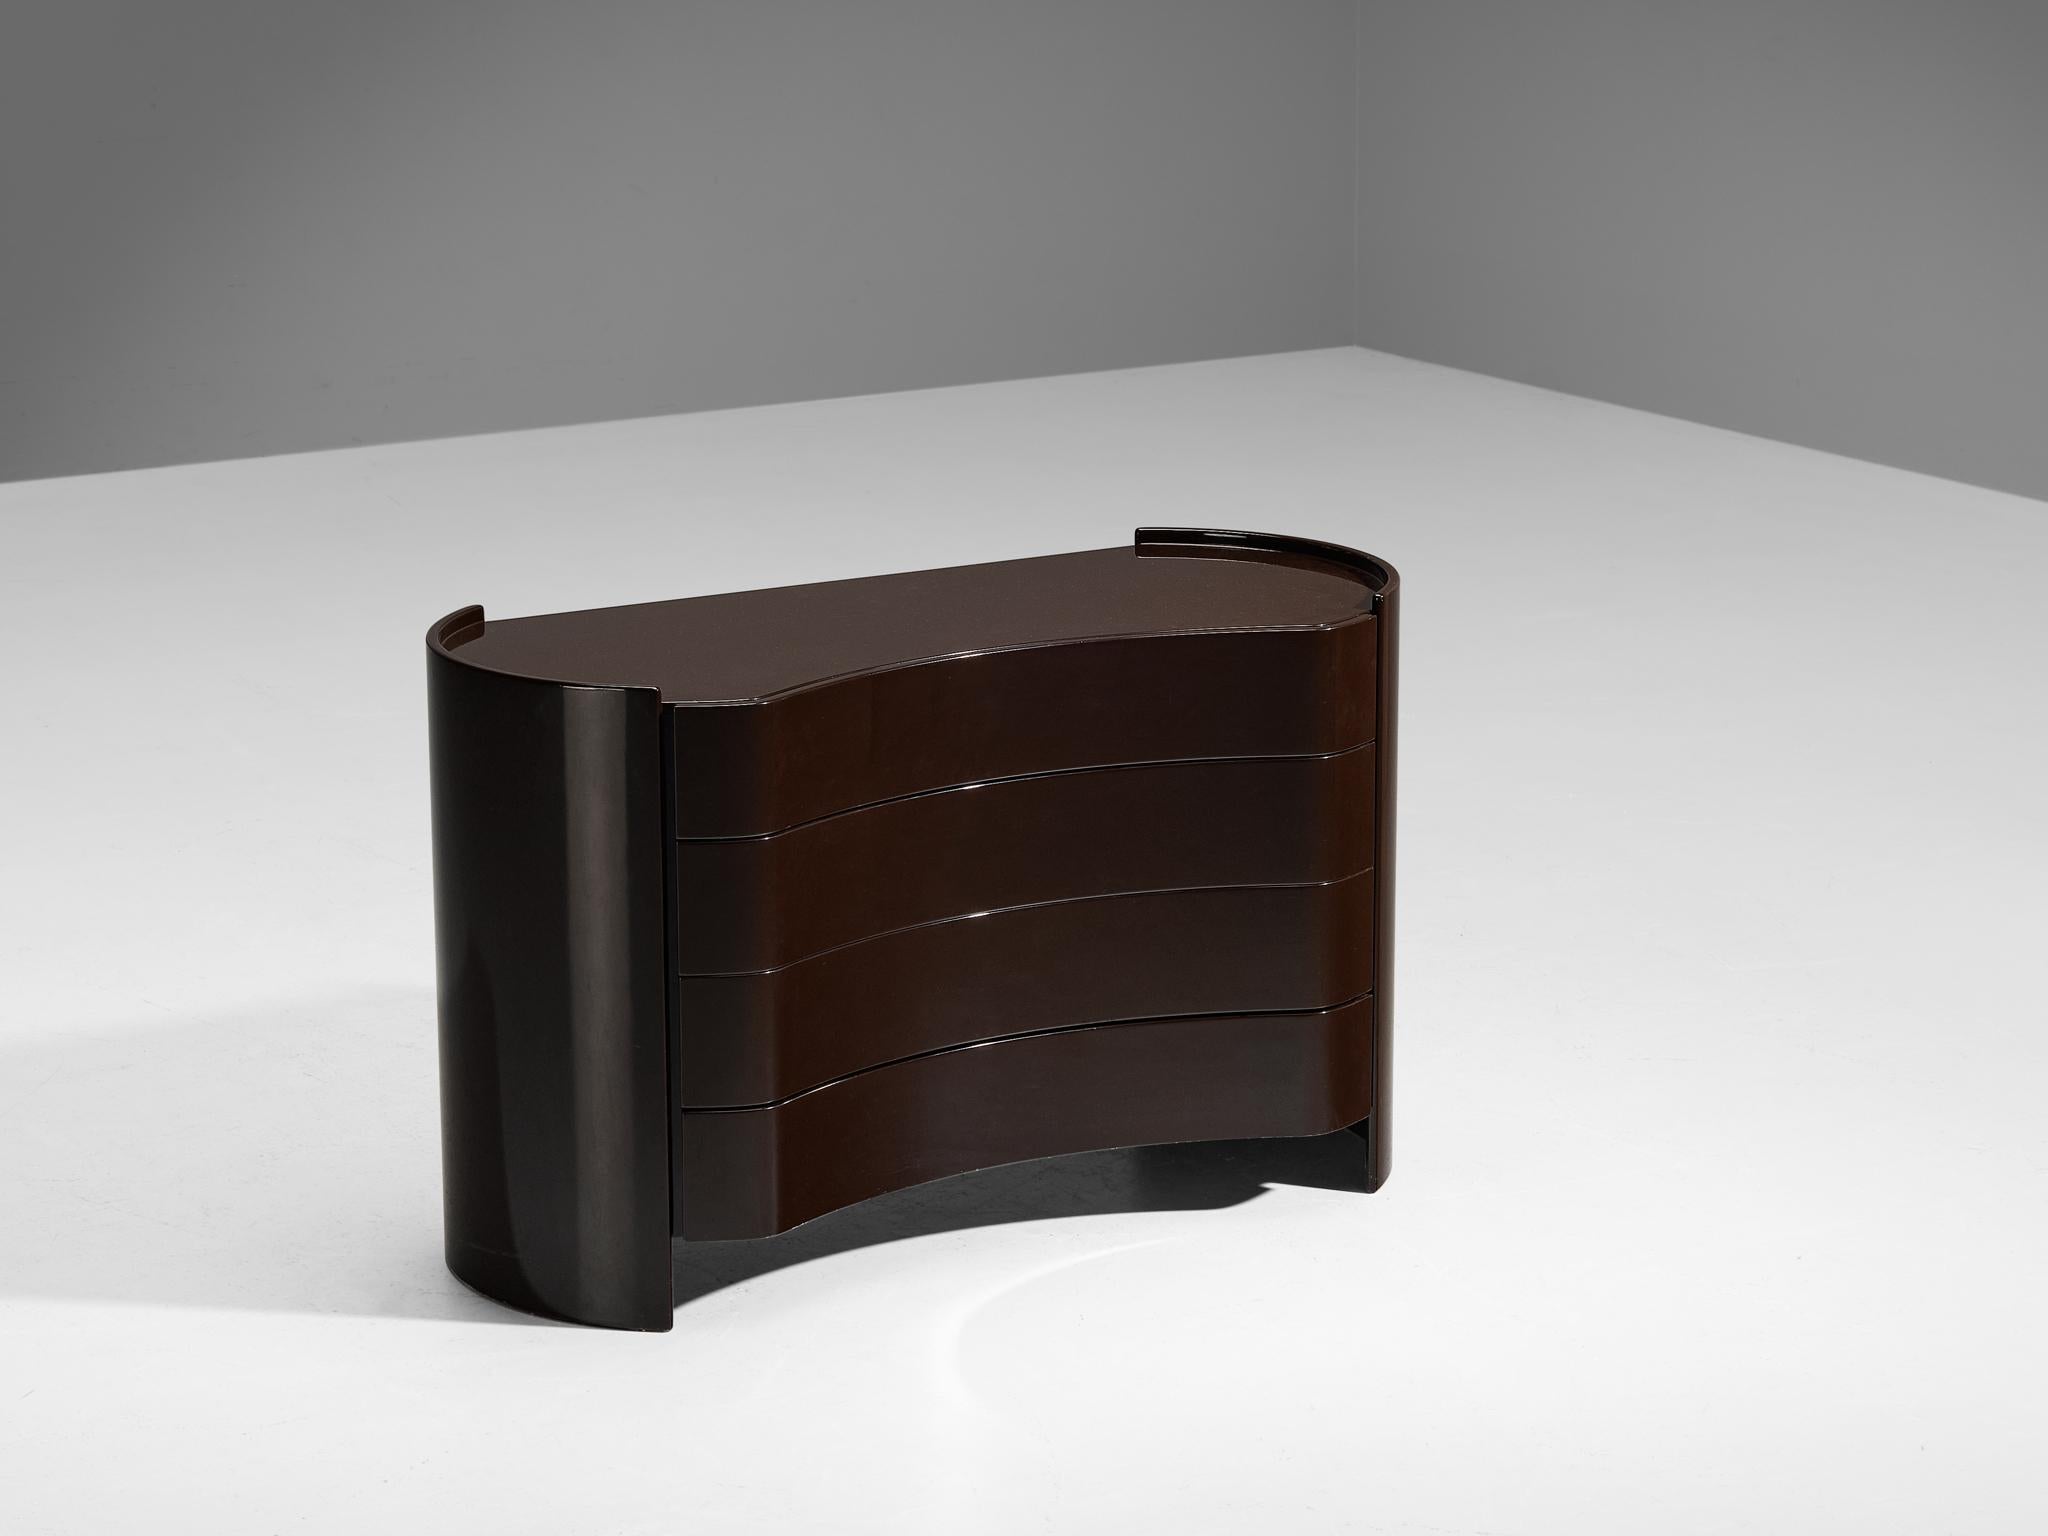 Benatti, chest of drawers model 'Aiace', lacquered wood, Italy, 1960s

Playful curved chest of drawers, created by Italian manufacturer Benatti in the 1960s. The striking cabinet is kidney-shaped and finished in high gloss black lacquer. The